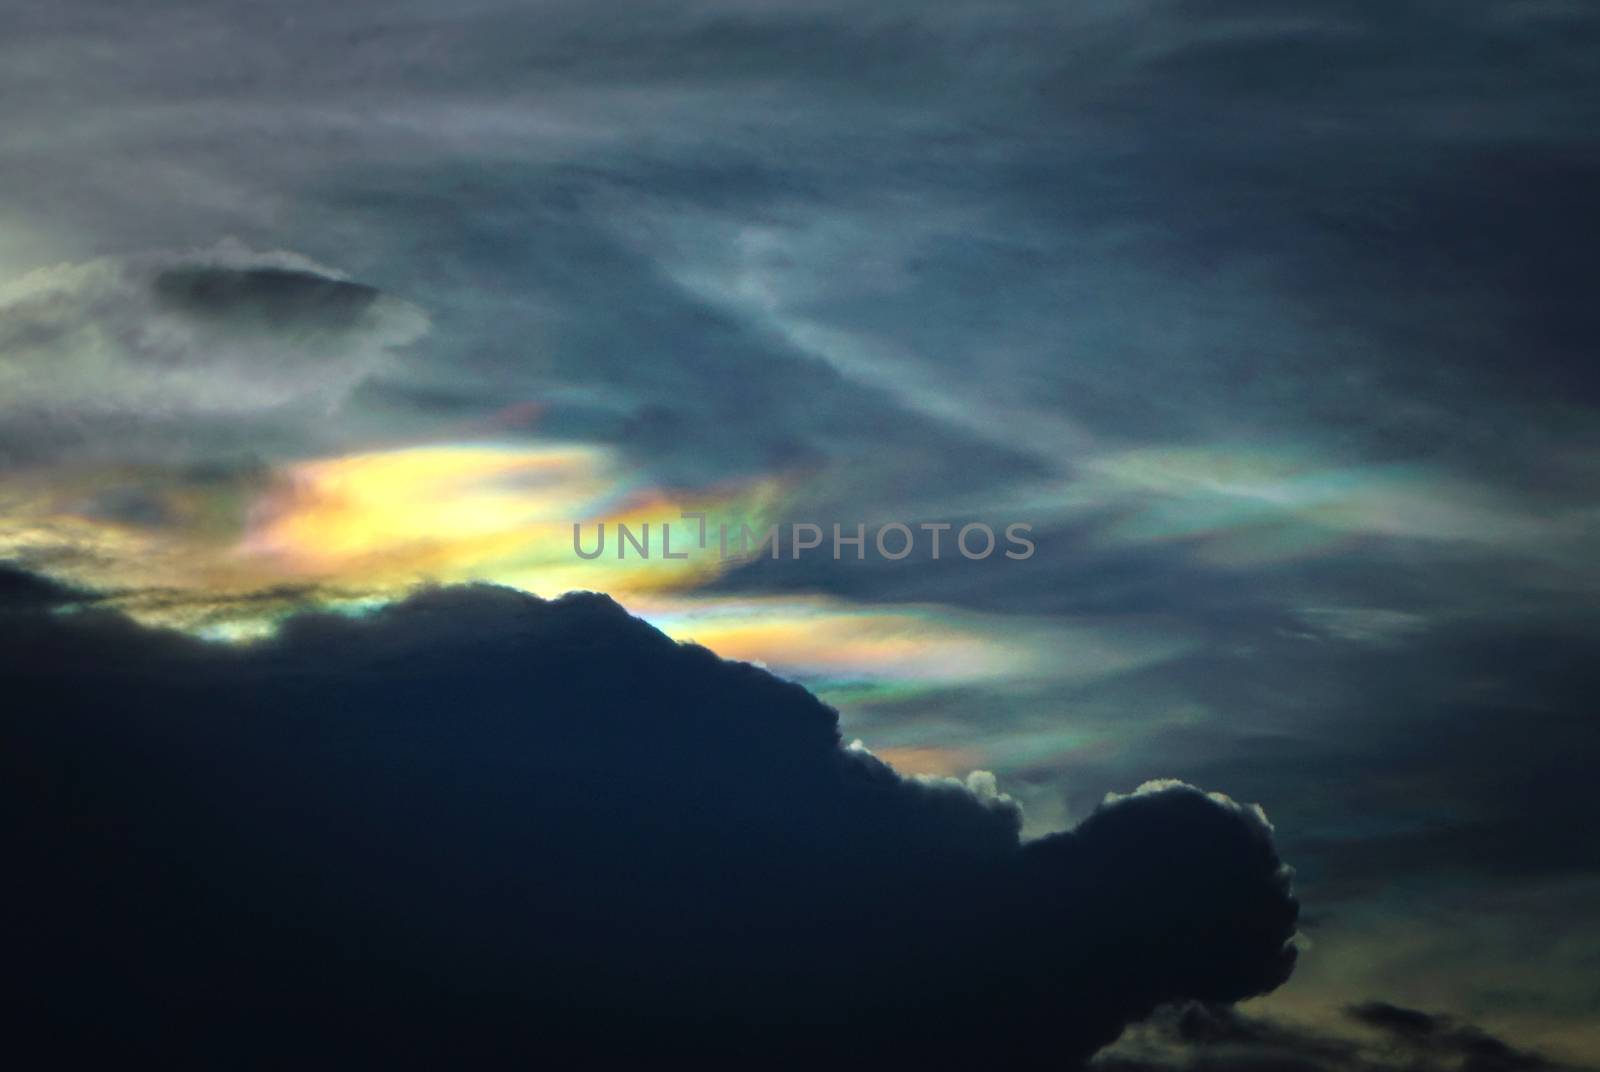 Cloud iridescence or irisation is a colorful optical phenomenon that occurs in a cloud and appears in the general proximity of the Sun or Moon.